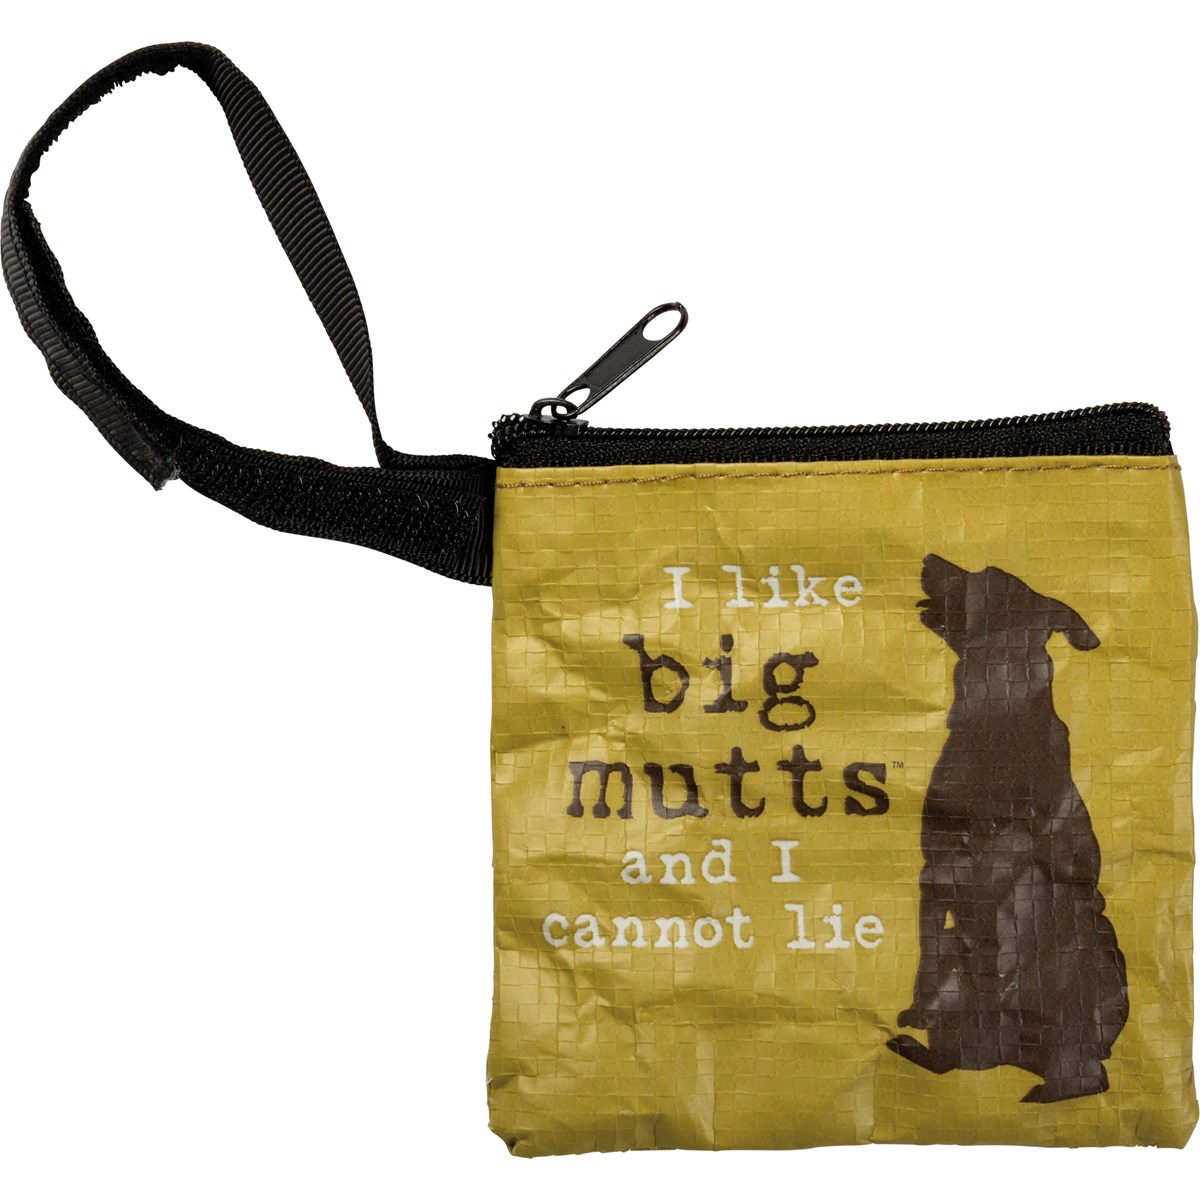 Pet Waste Bag Pouch - I Like Big Mutts - 3.50" x 3.50" - Post-Consumer Material, Nylon, Plastic, Metal